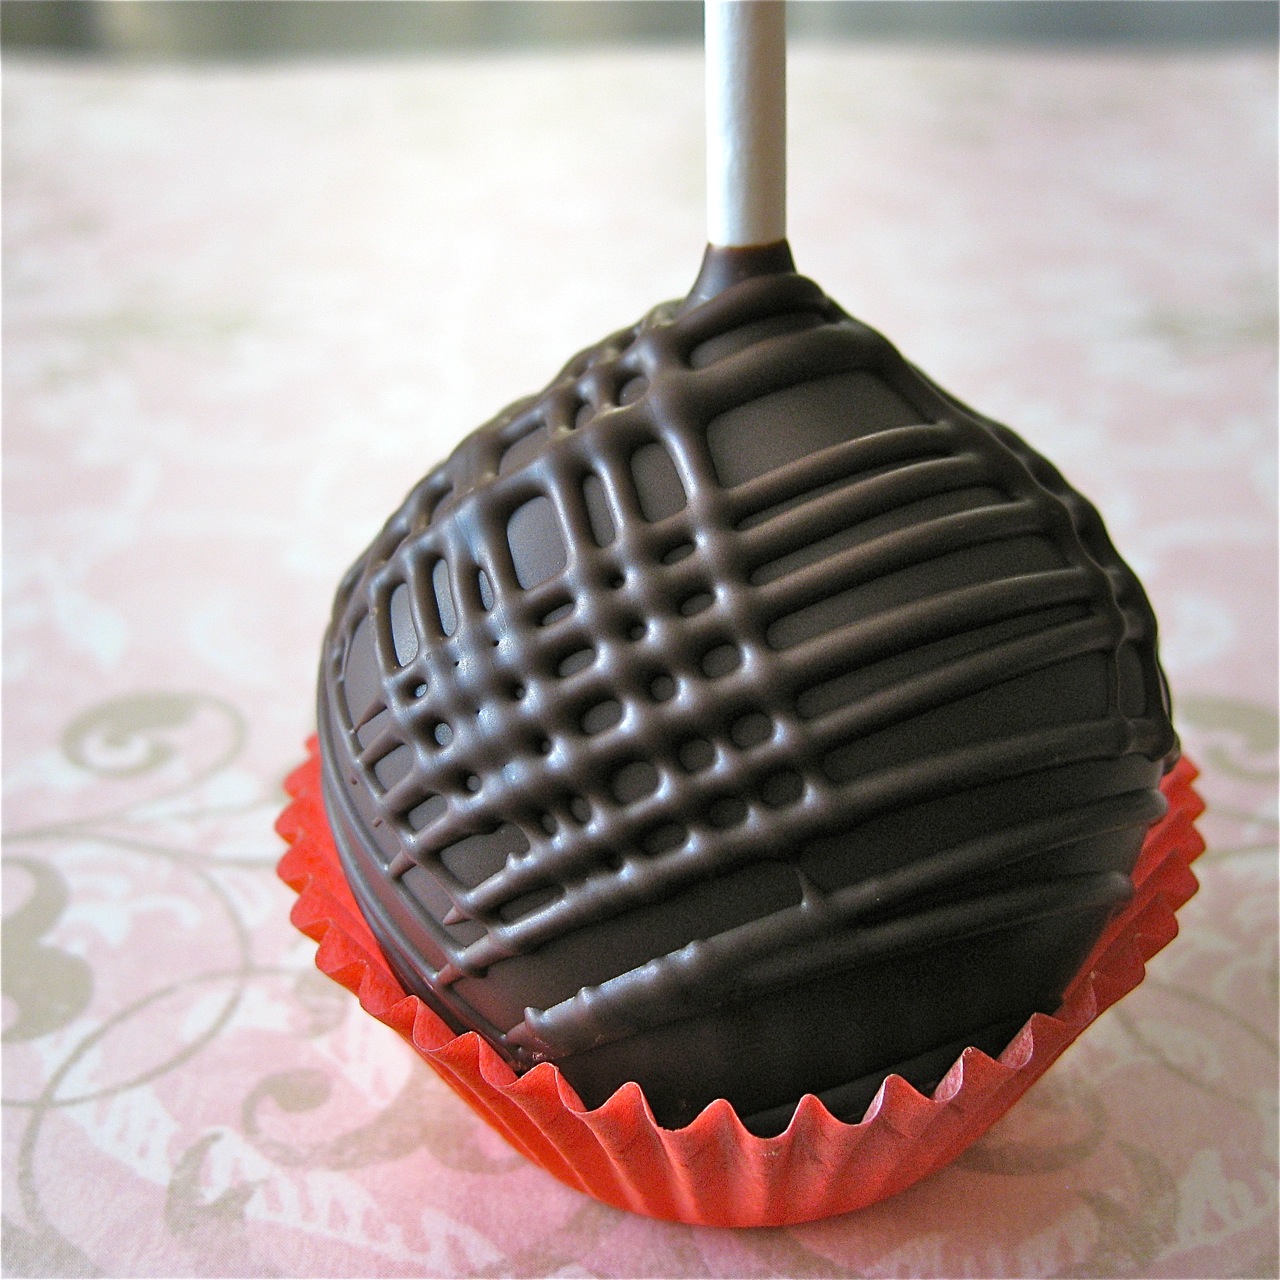 cake pop decorating ideas cake pops are one of my favorite miniature treats a few bites of cake 